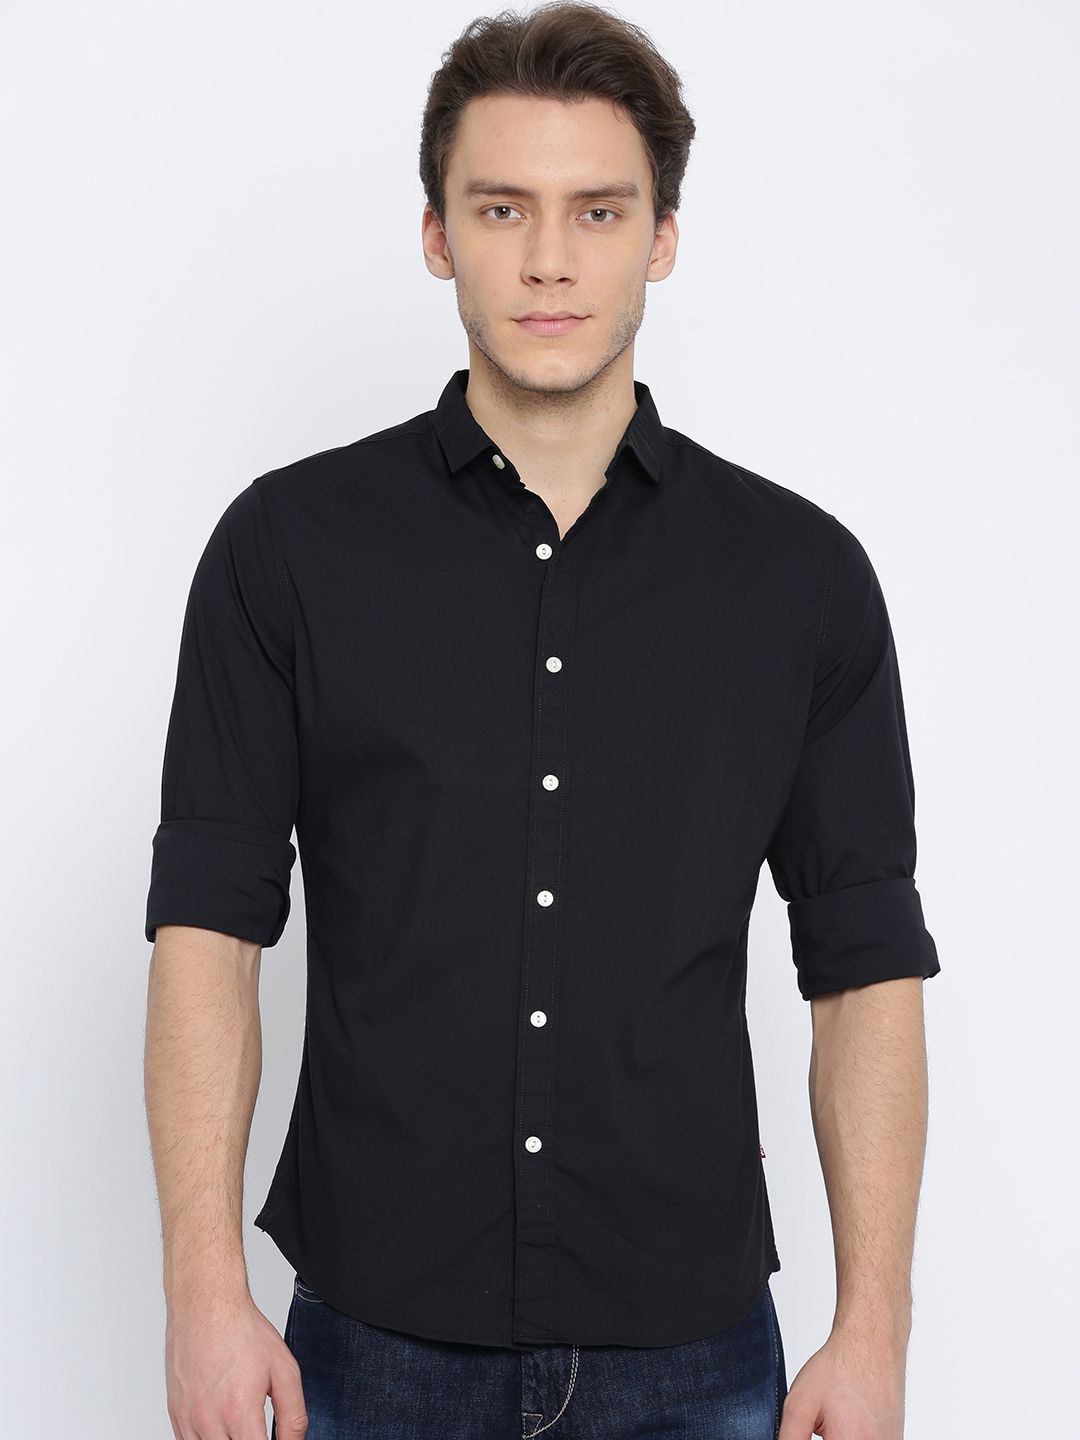 Levis Black Solid Slim Fit Casual Shirt for men price - Best buy price ...